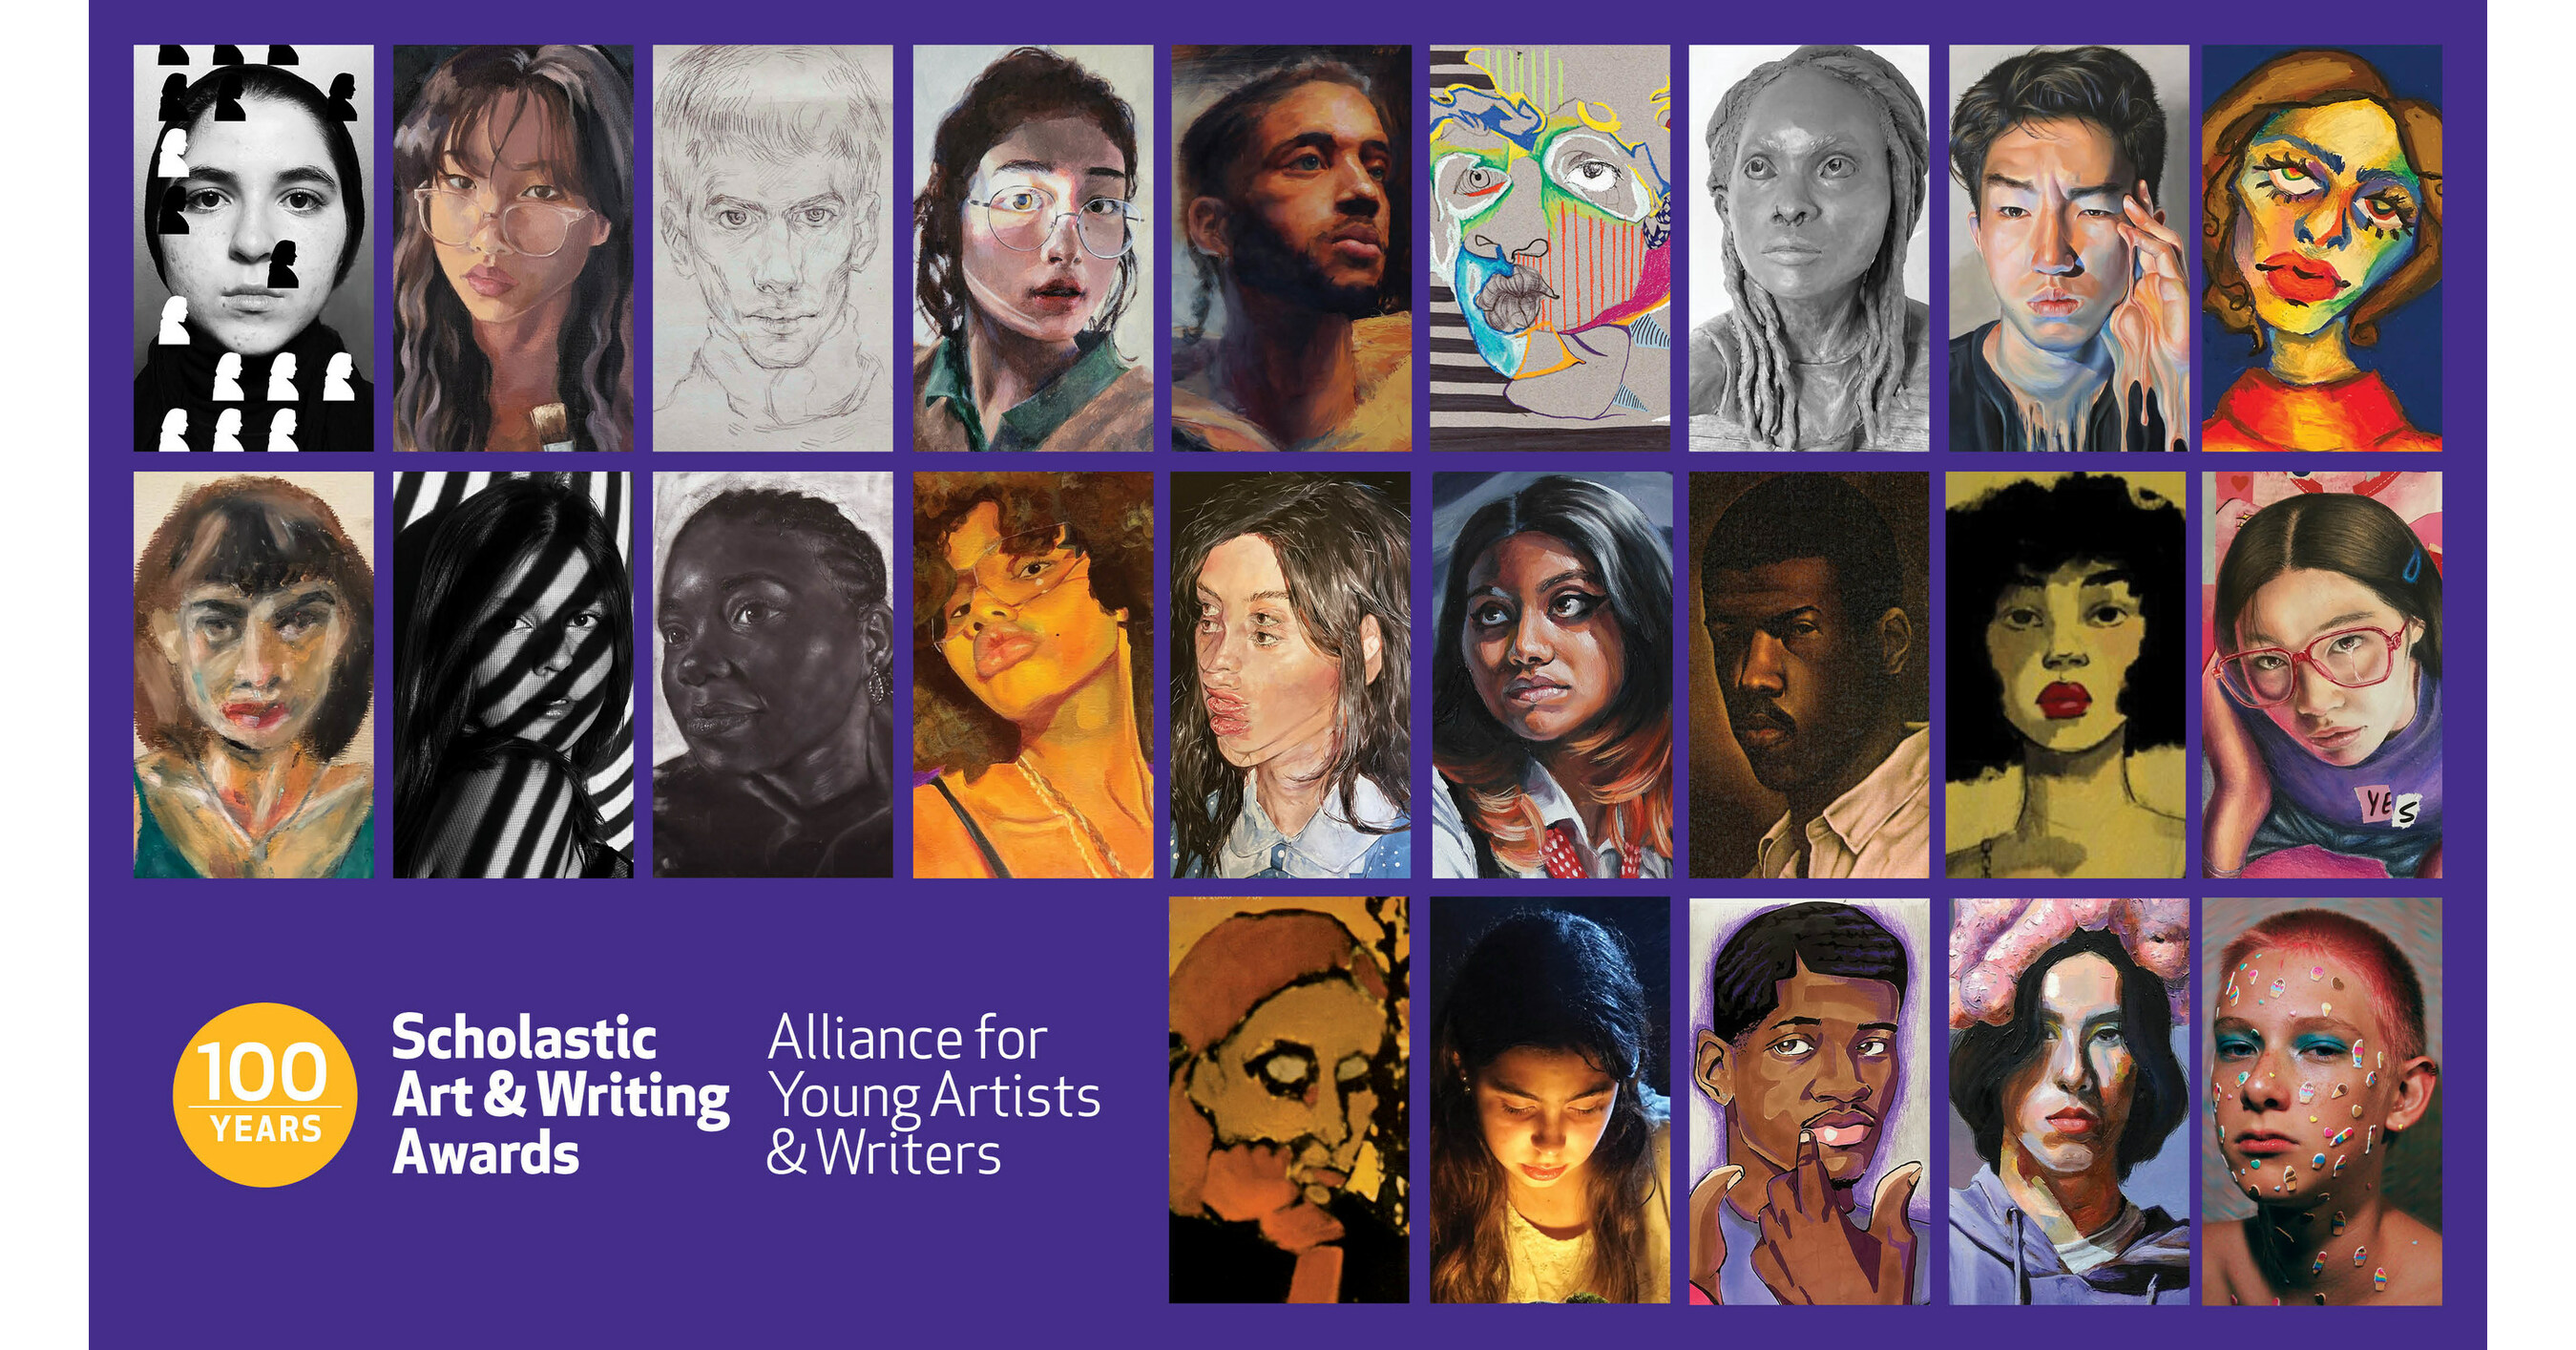 SCHOLASTIC ART & WRITING AWARDS MARKS 100 YEARS OF CELEBRATING YOUNG